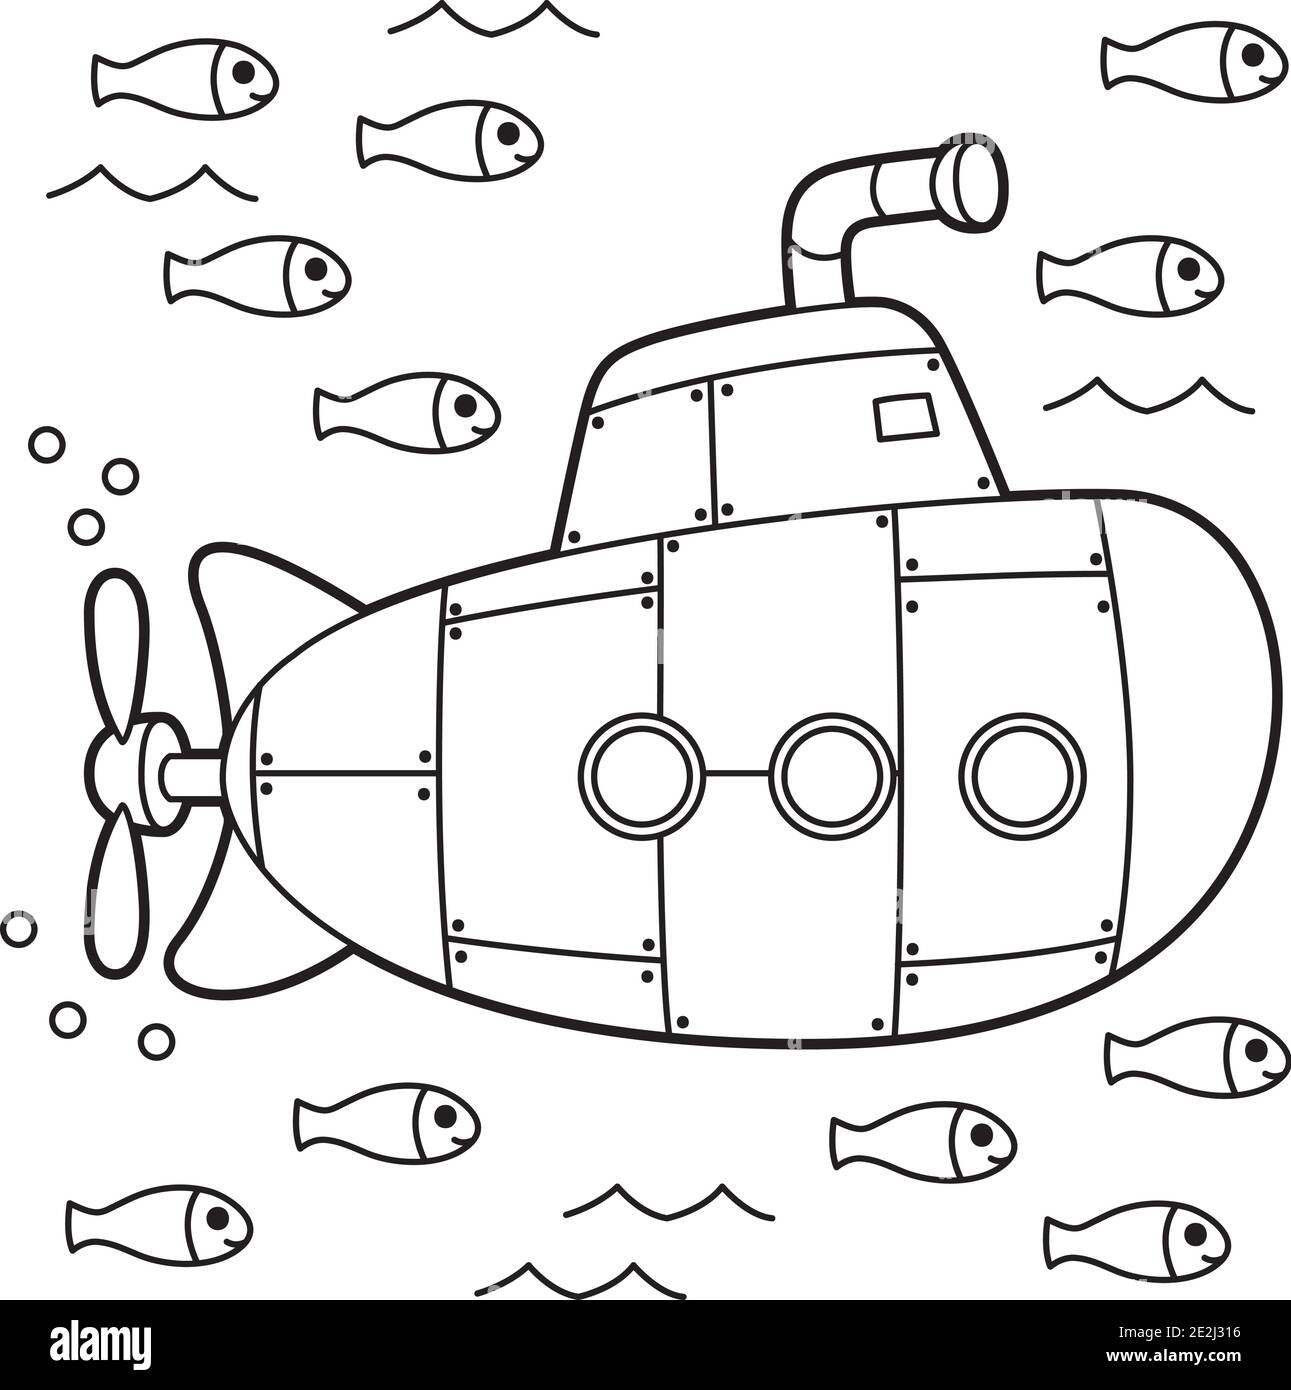 Submarine coloring page stock vector image art